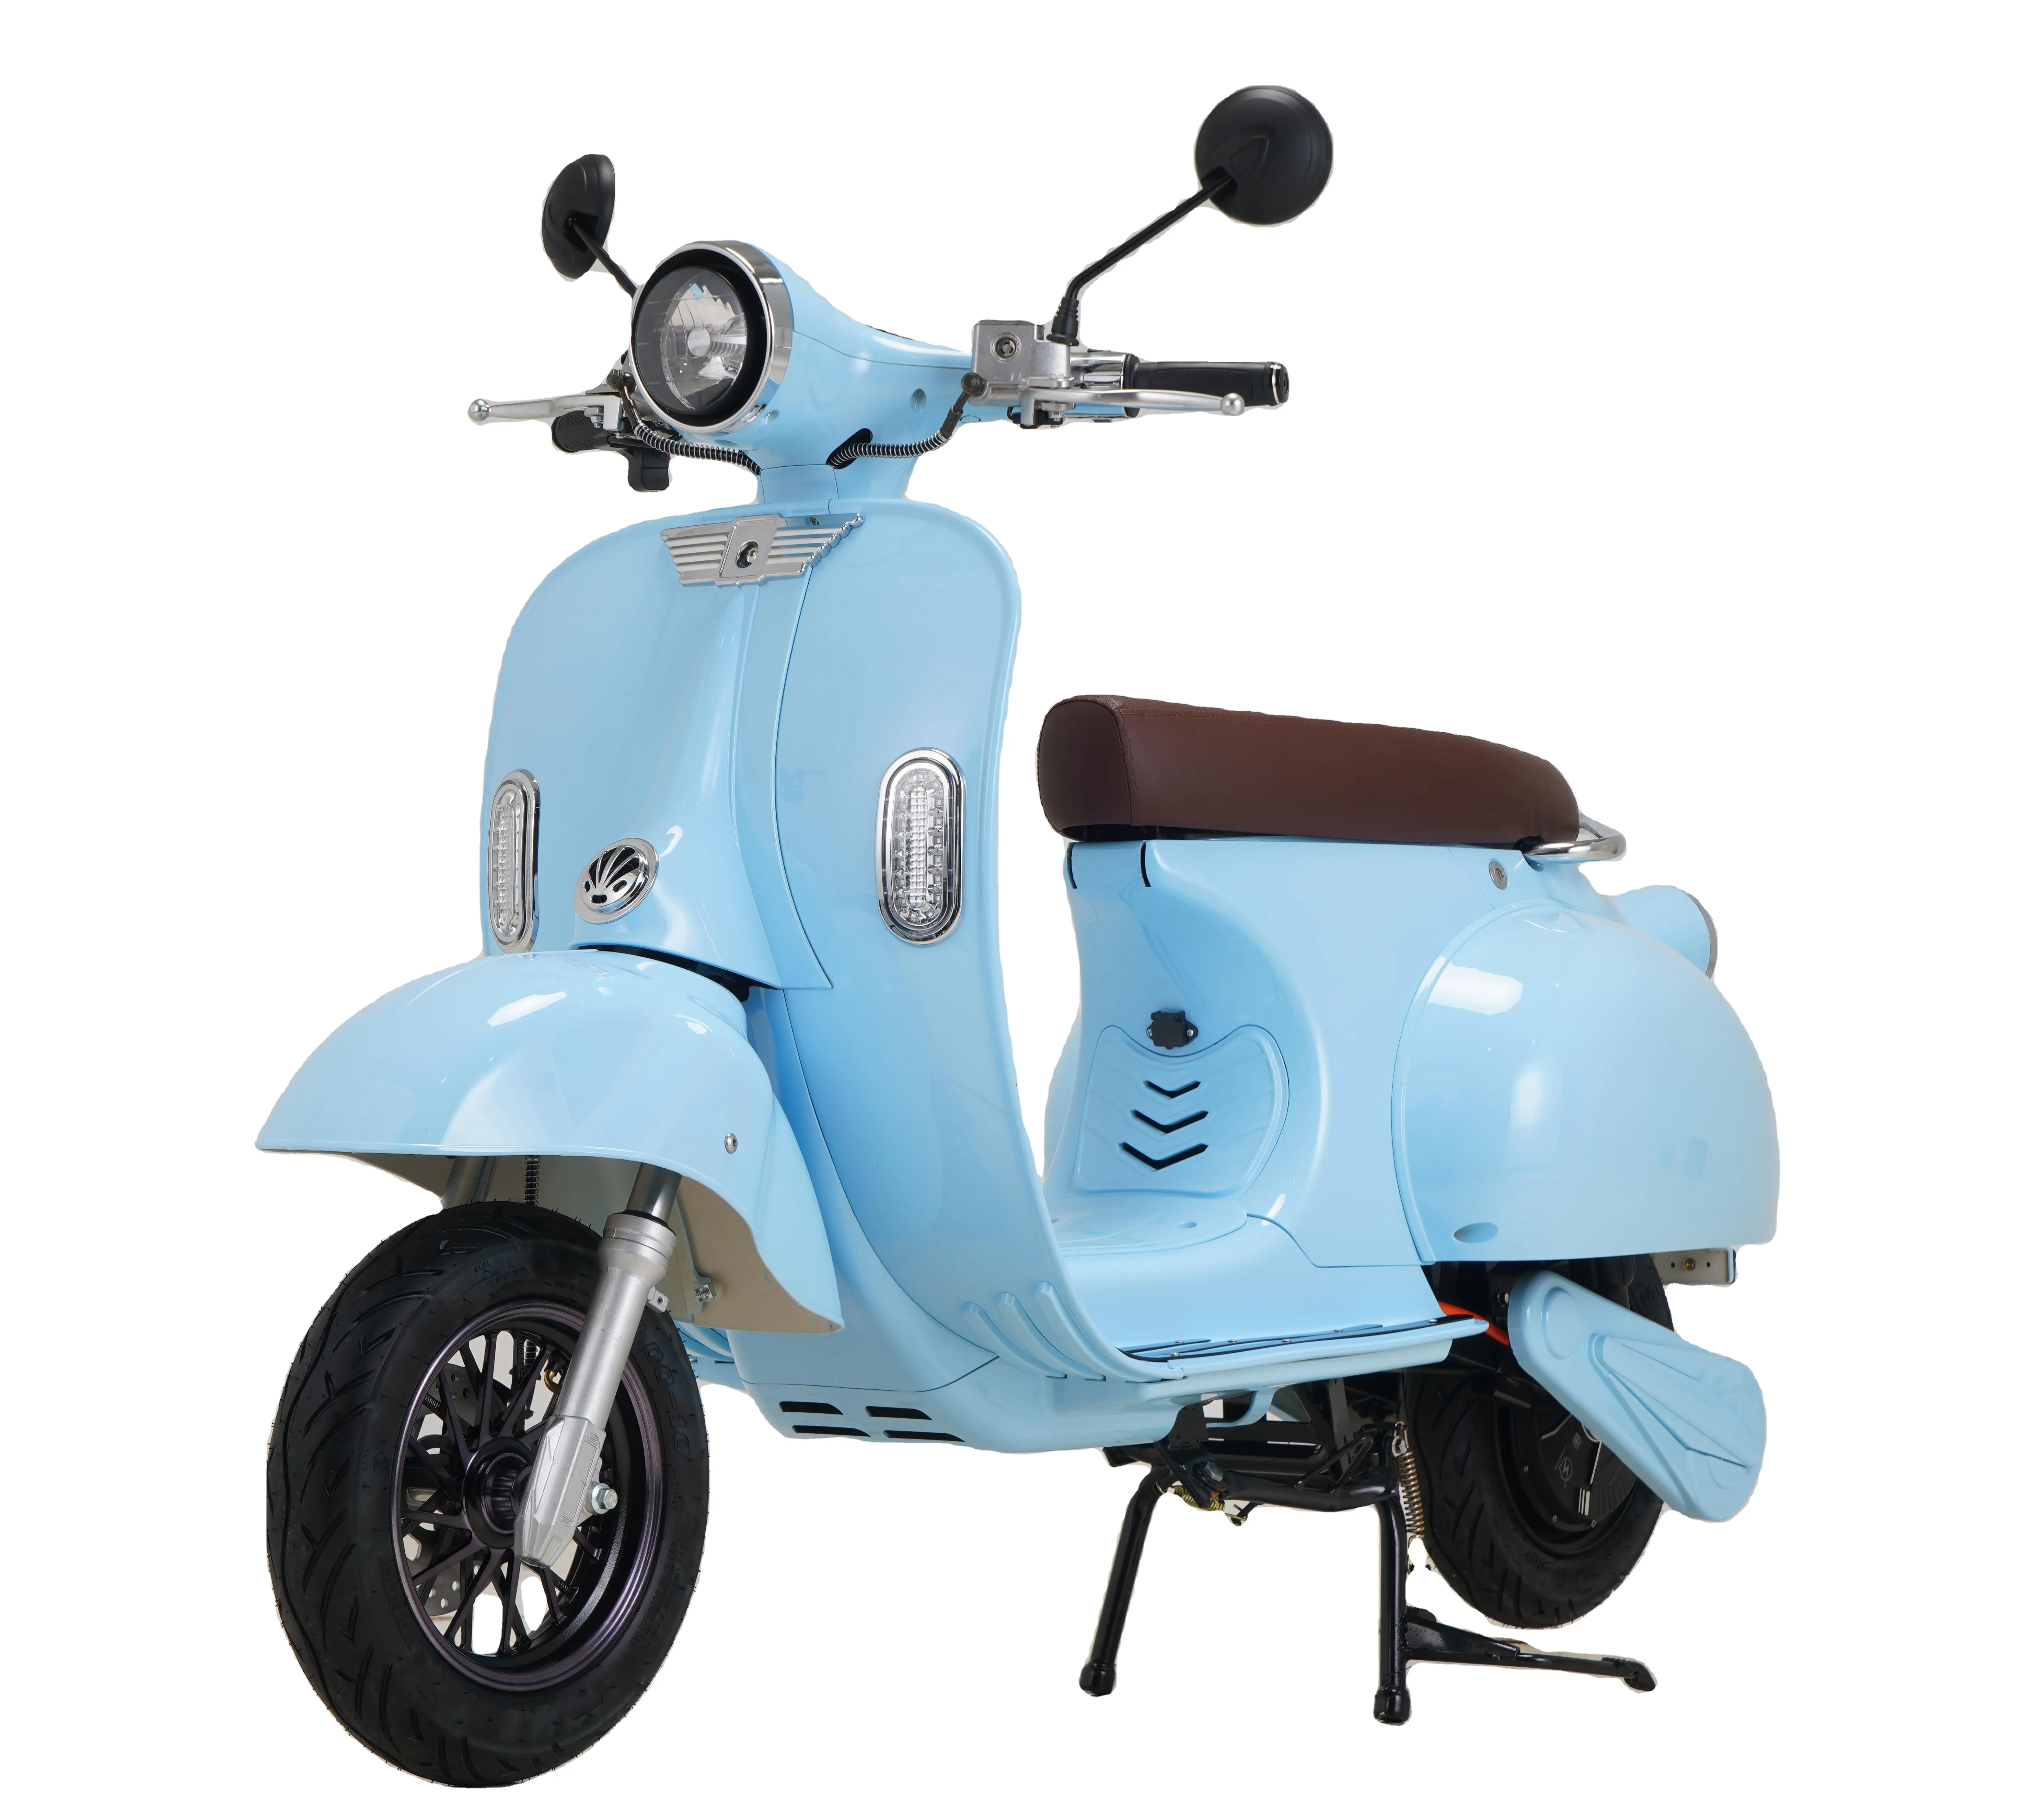 Hot Selling Vespa 1500w 60km Adult Electric Sport Motorrad Zweirad Electric Moped Scooter Mit Pedal